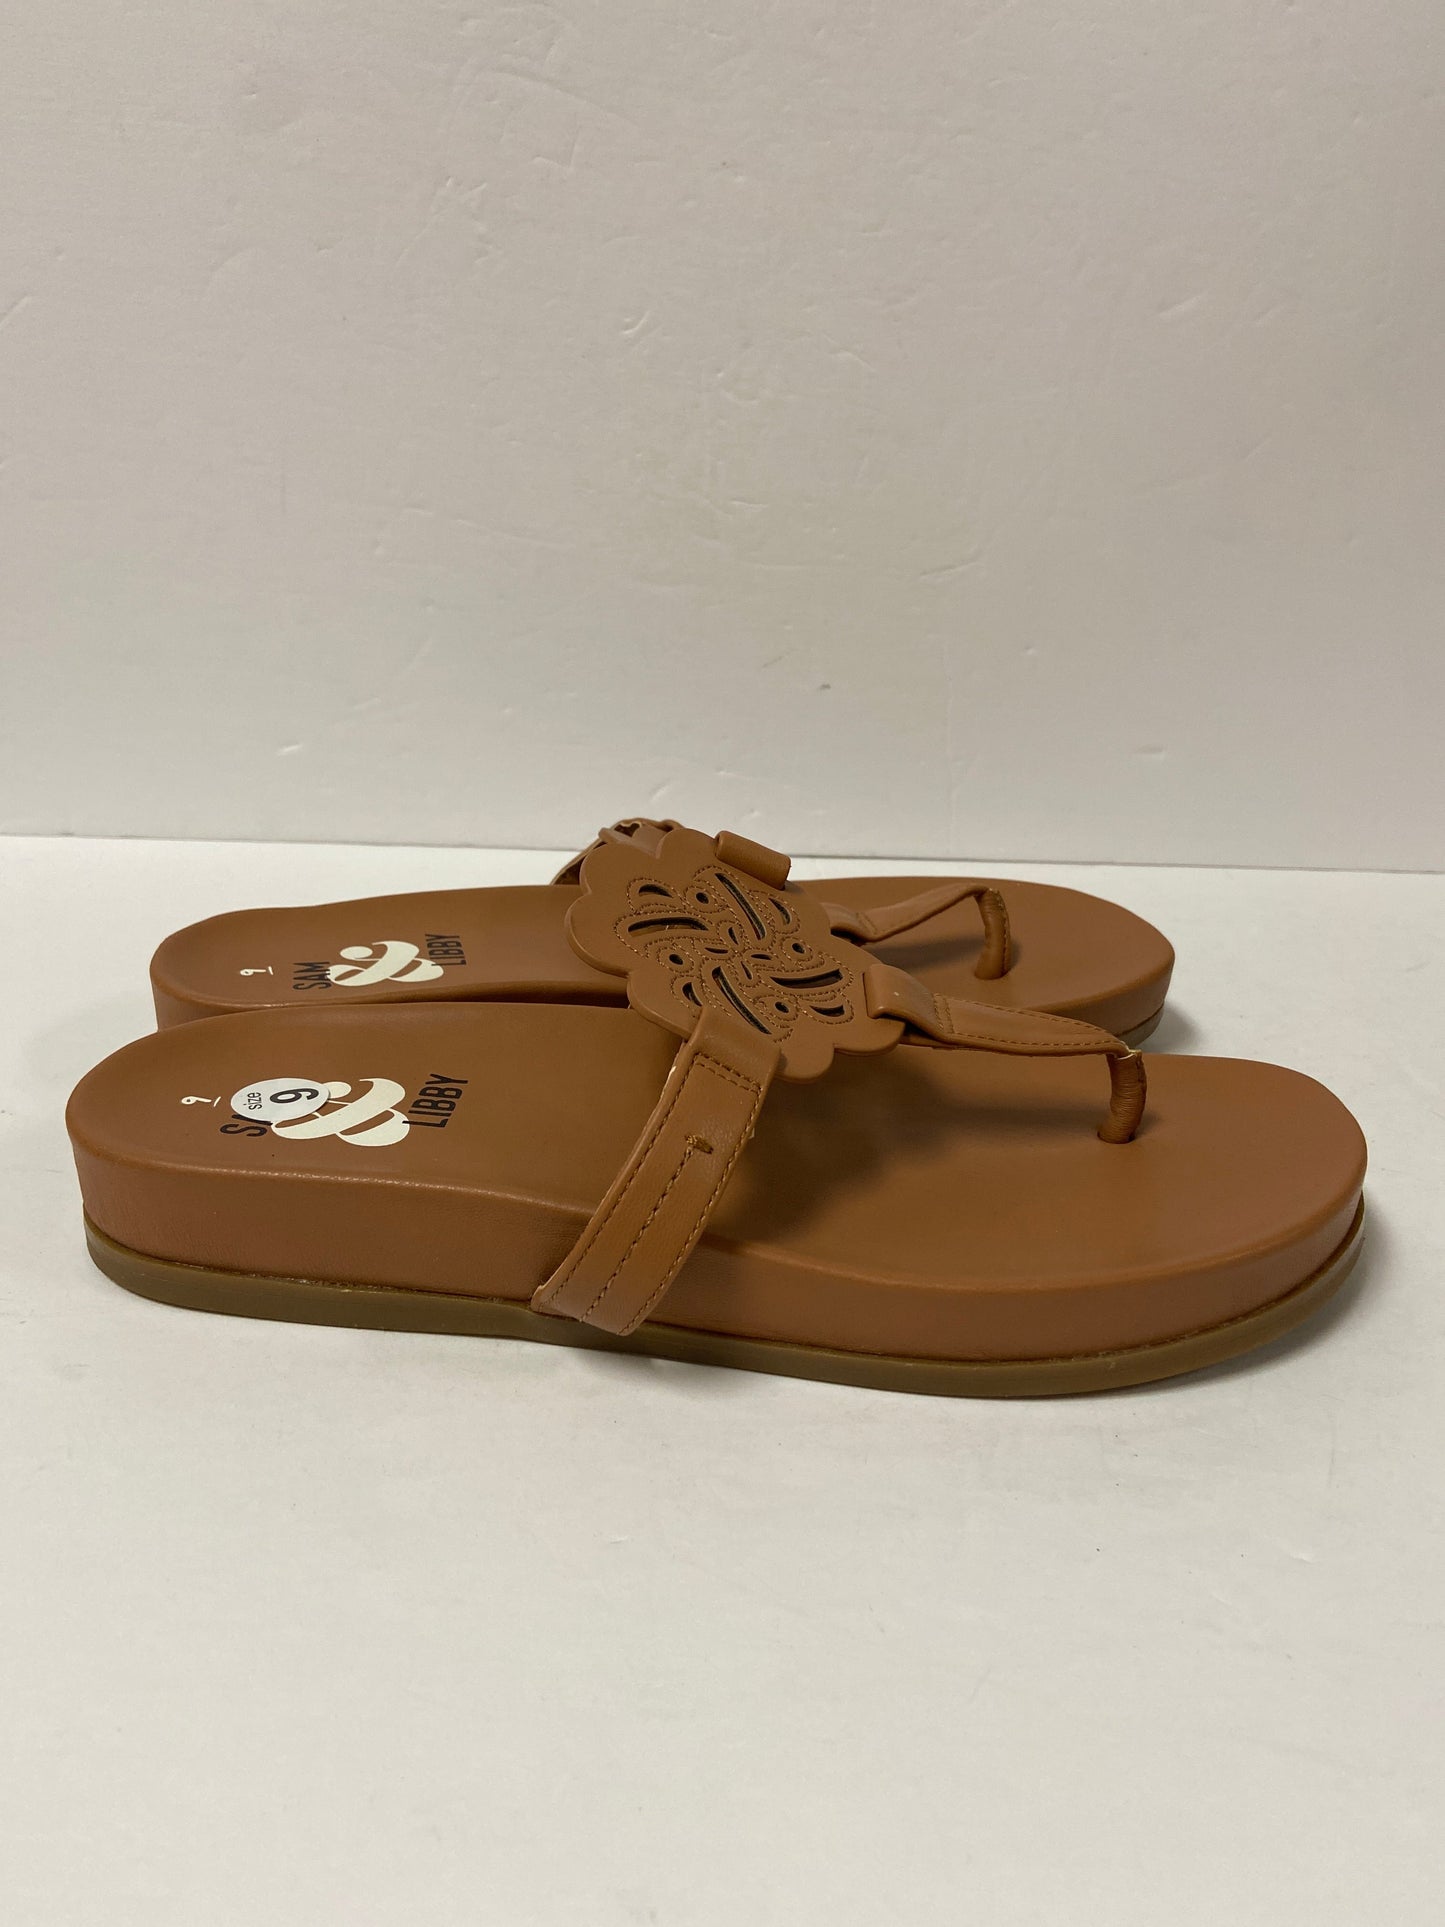 Sandals Flip Flops By Sam And Libby  Size: 9